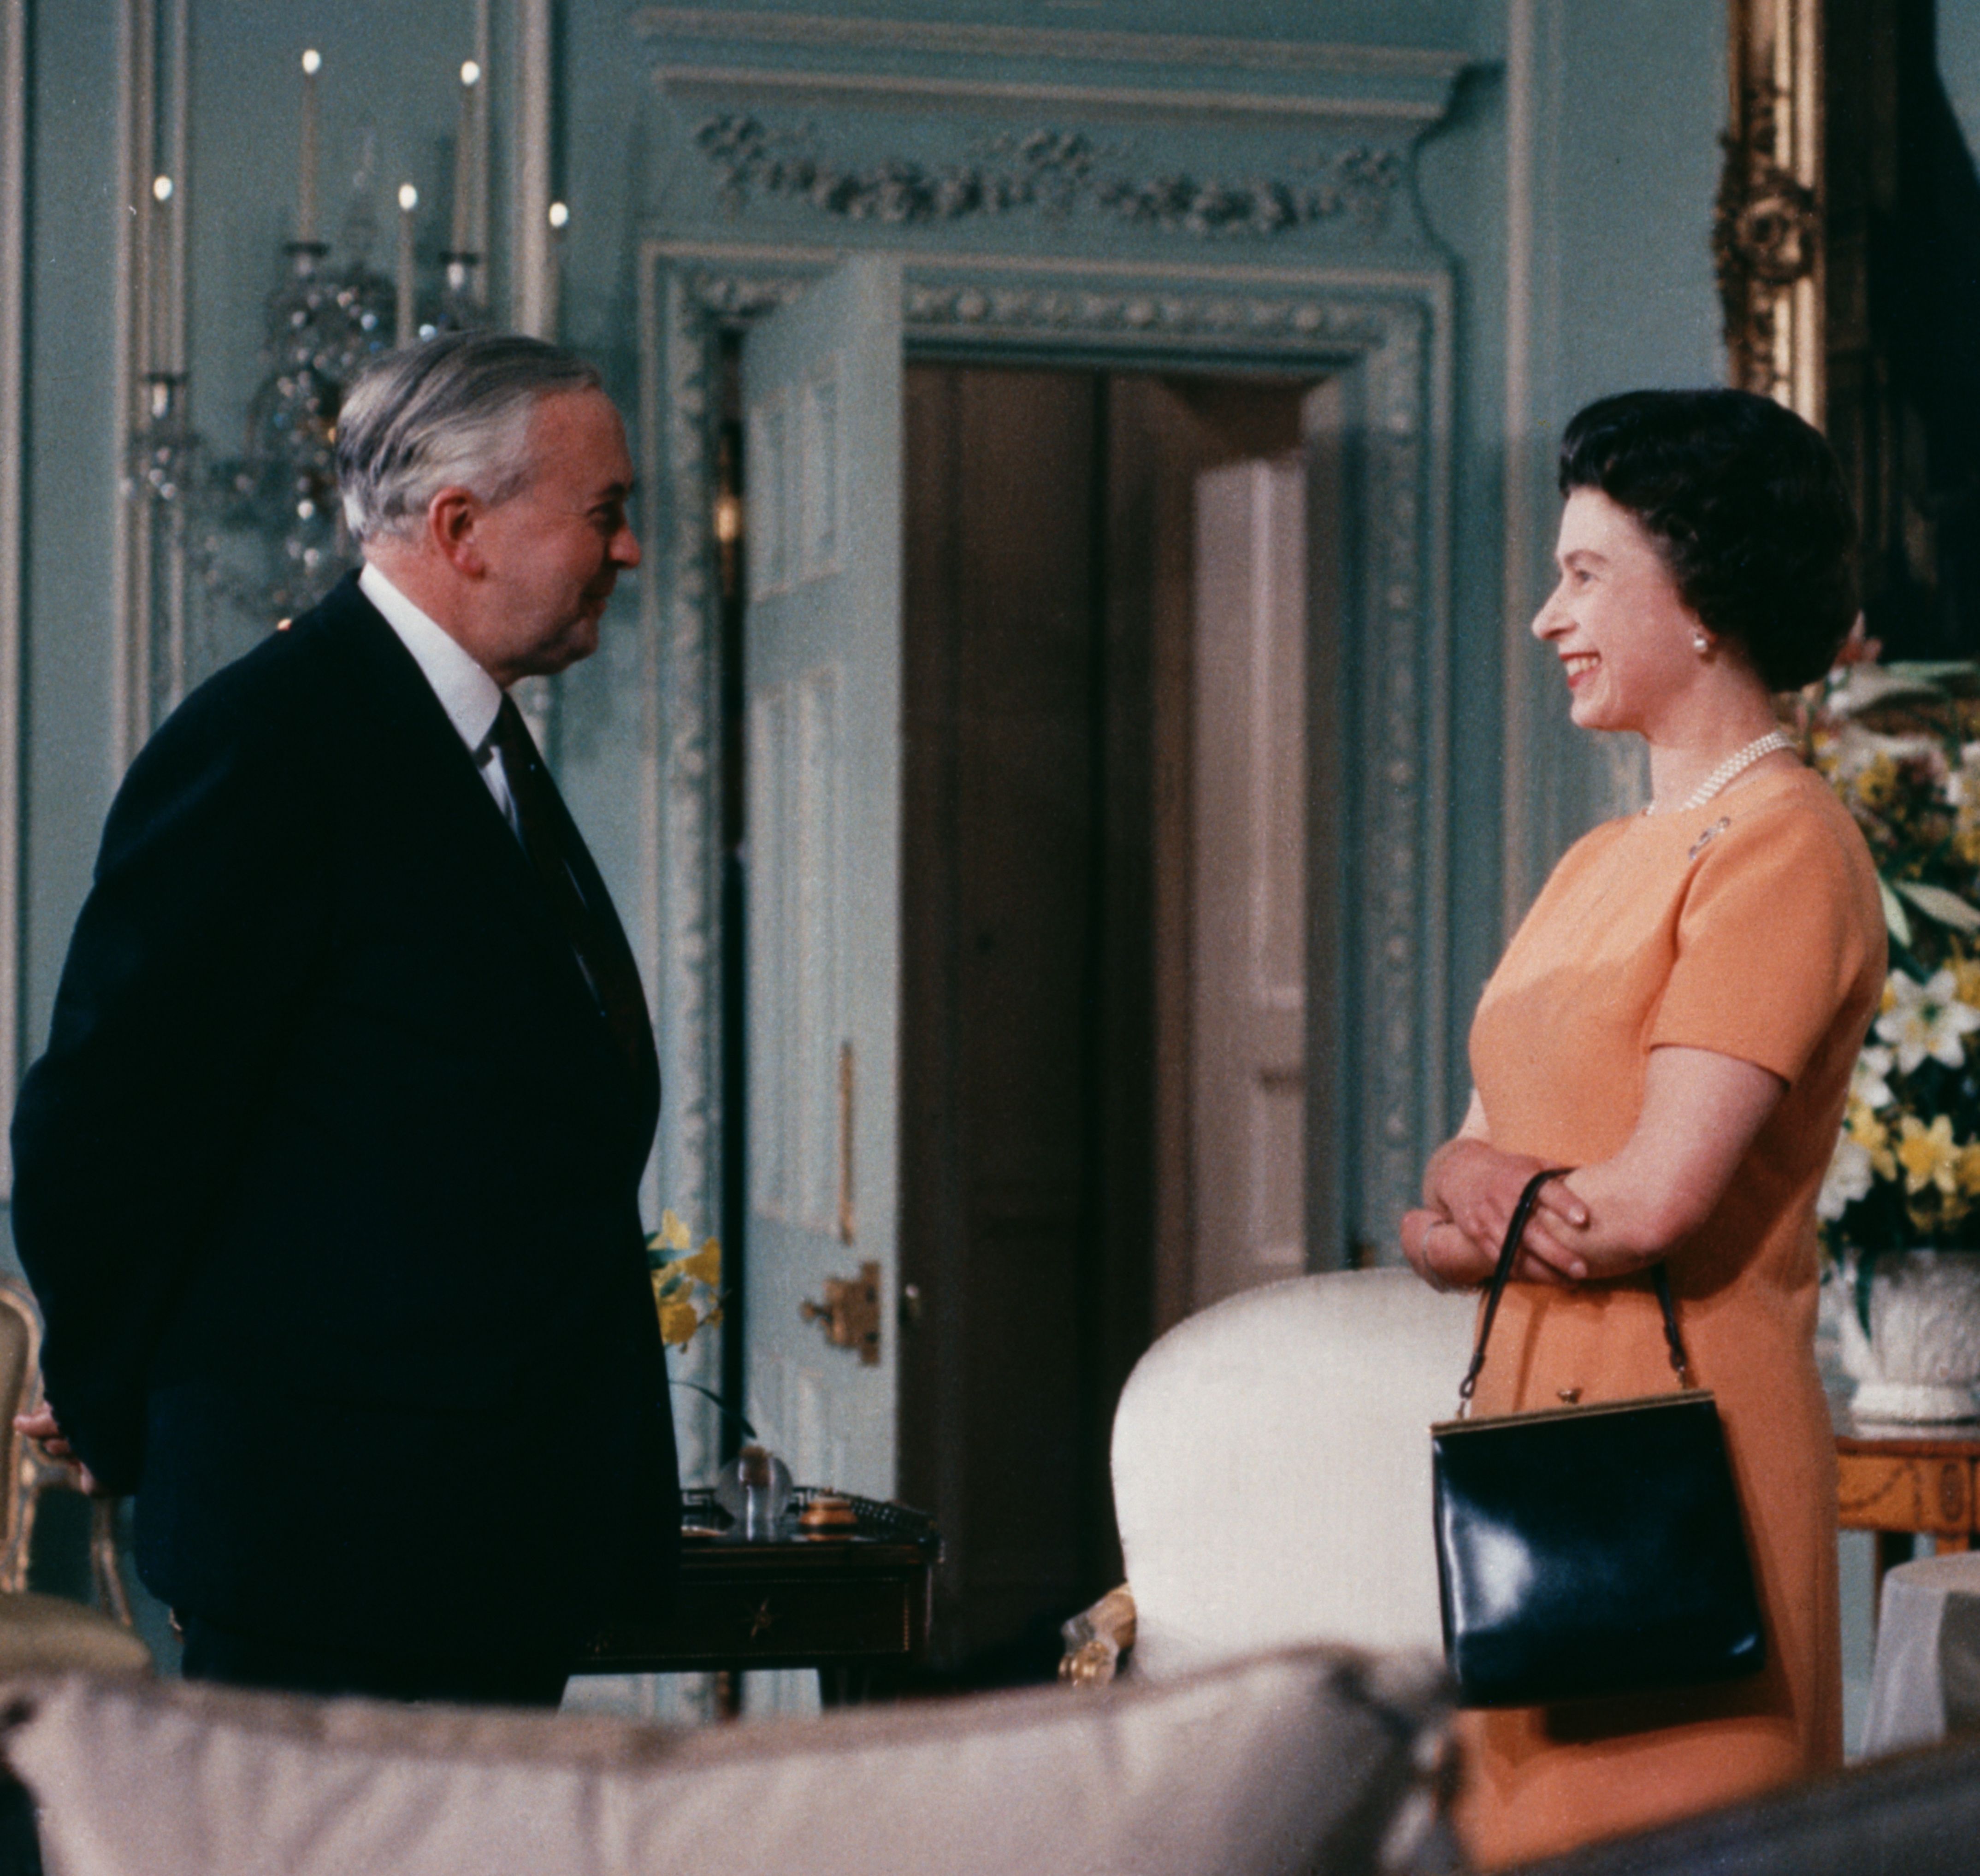 Queen Elizabeth II with British Prime Minister Harold Wilson in June 1969. Photo: Fox Photos/Hulton Archive/Getty Images